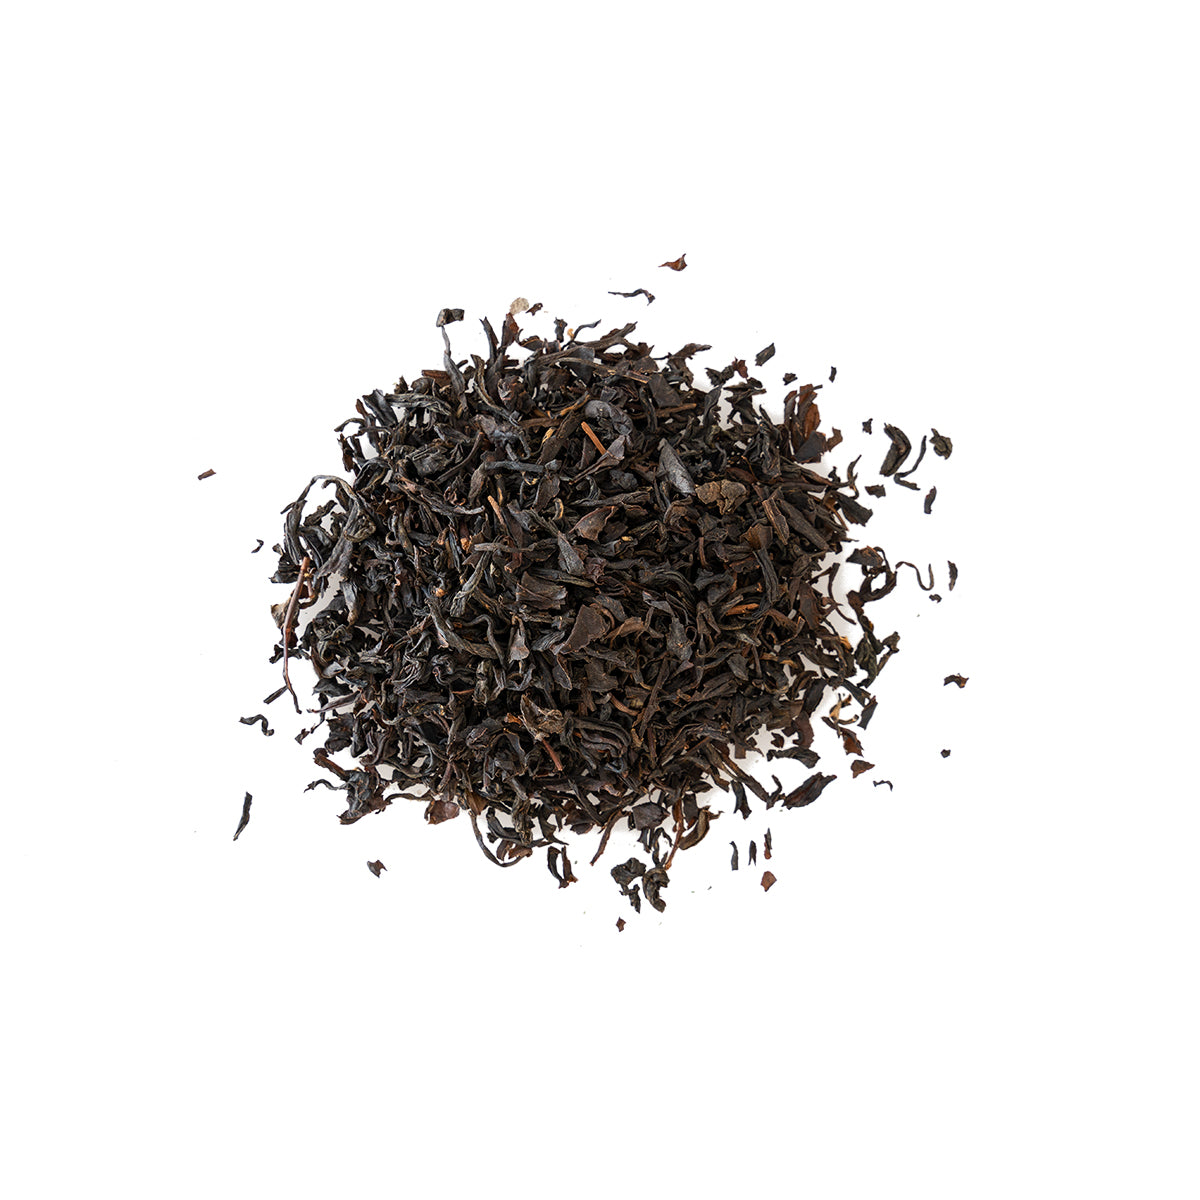 Primary Image of Organic Chinese Lapsang Souchong Tea